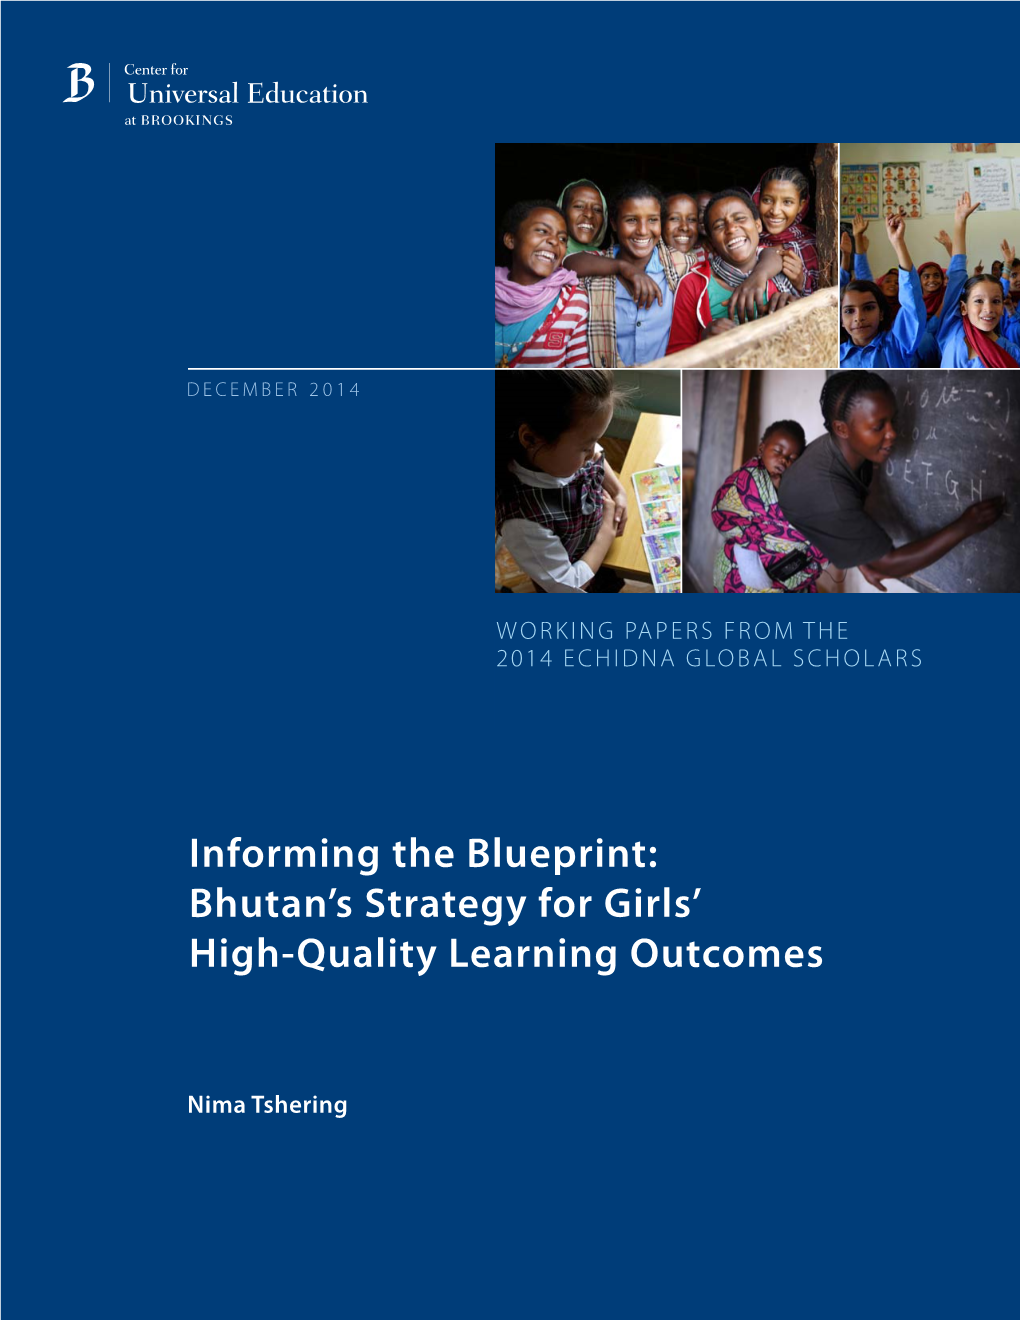 Bhutan's Strategy for Girls' High-Quality